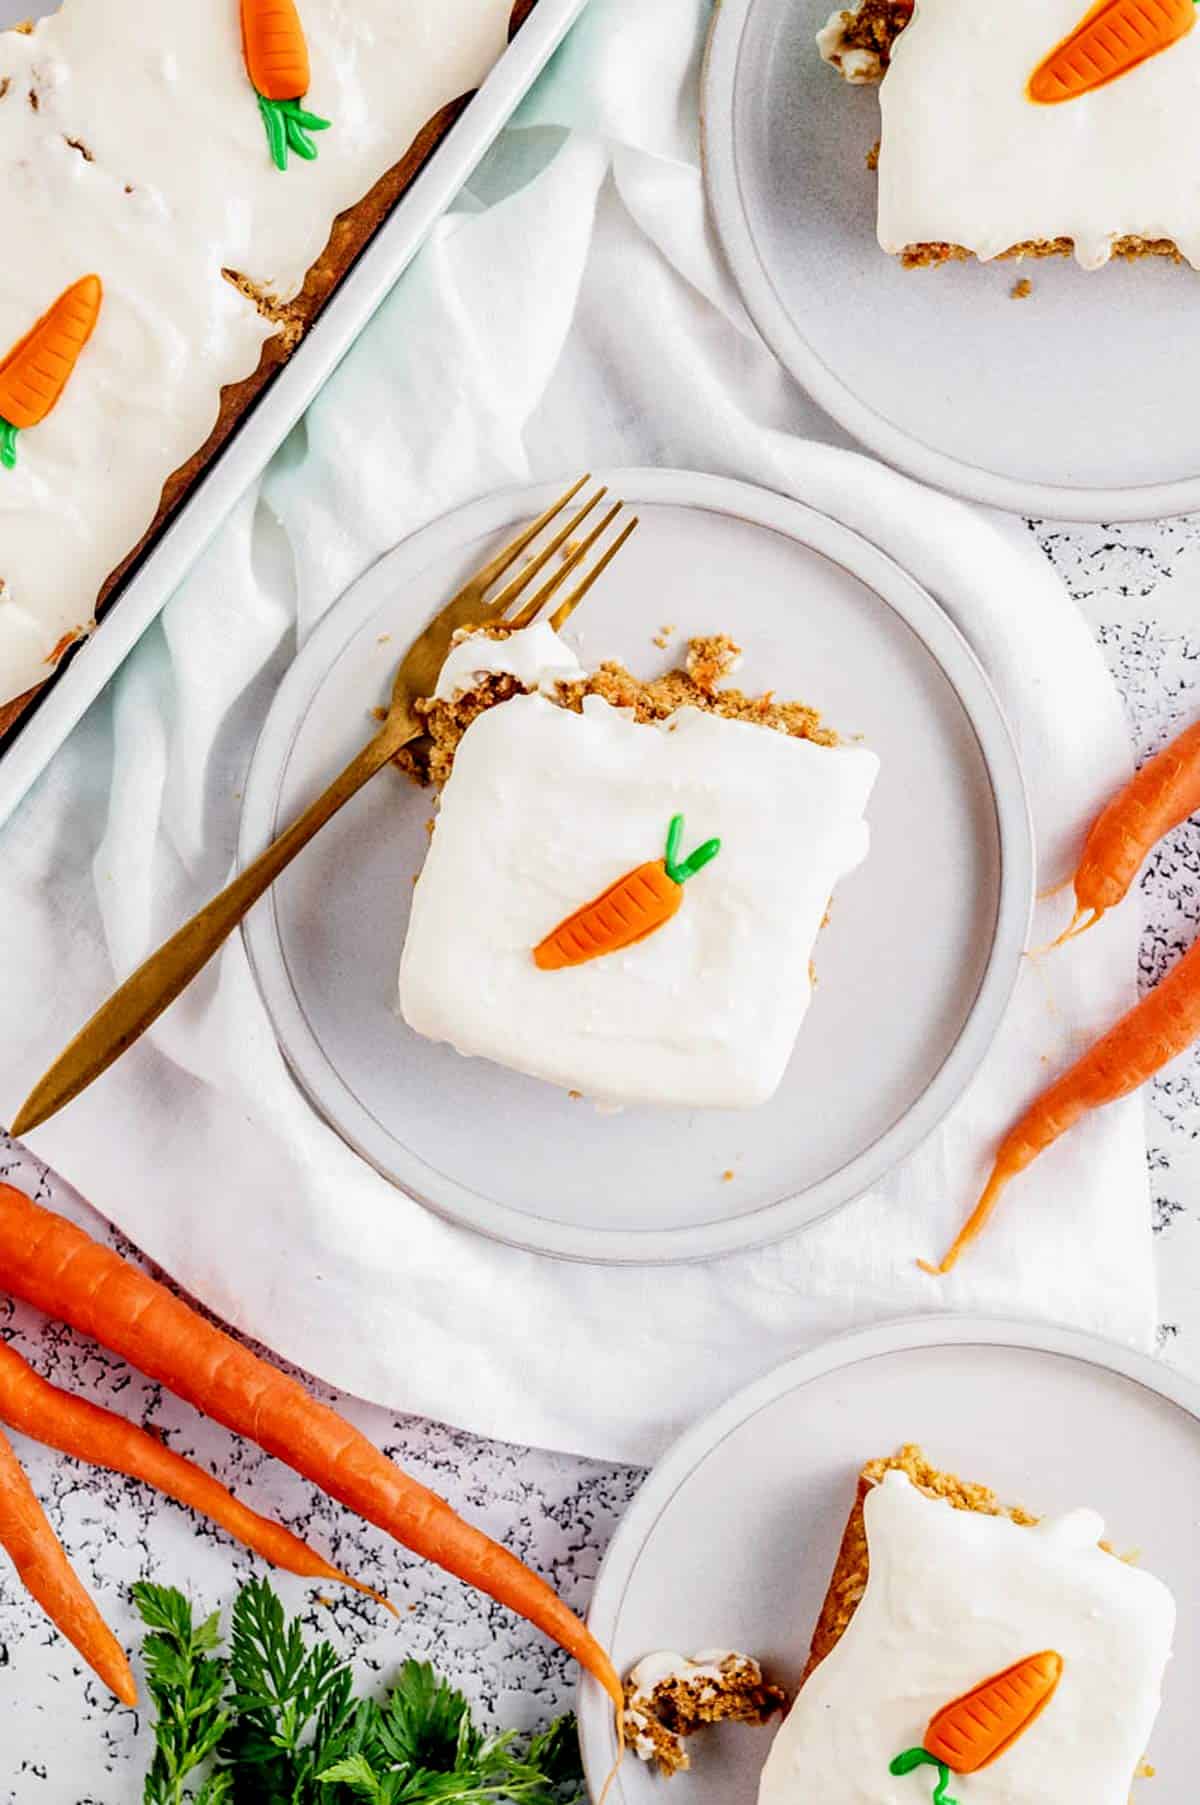 Overhead image of slices of carrot cake on three small plates.